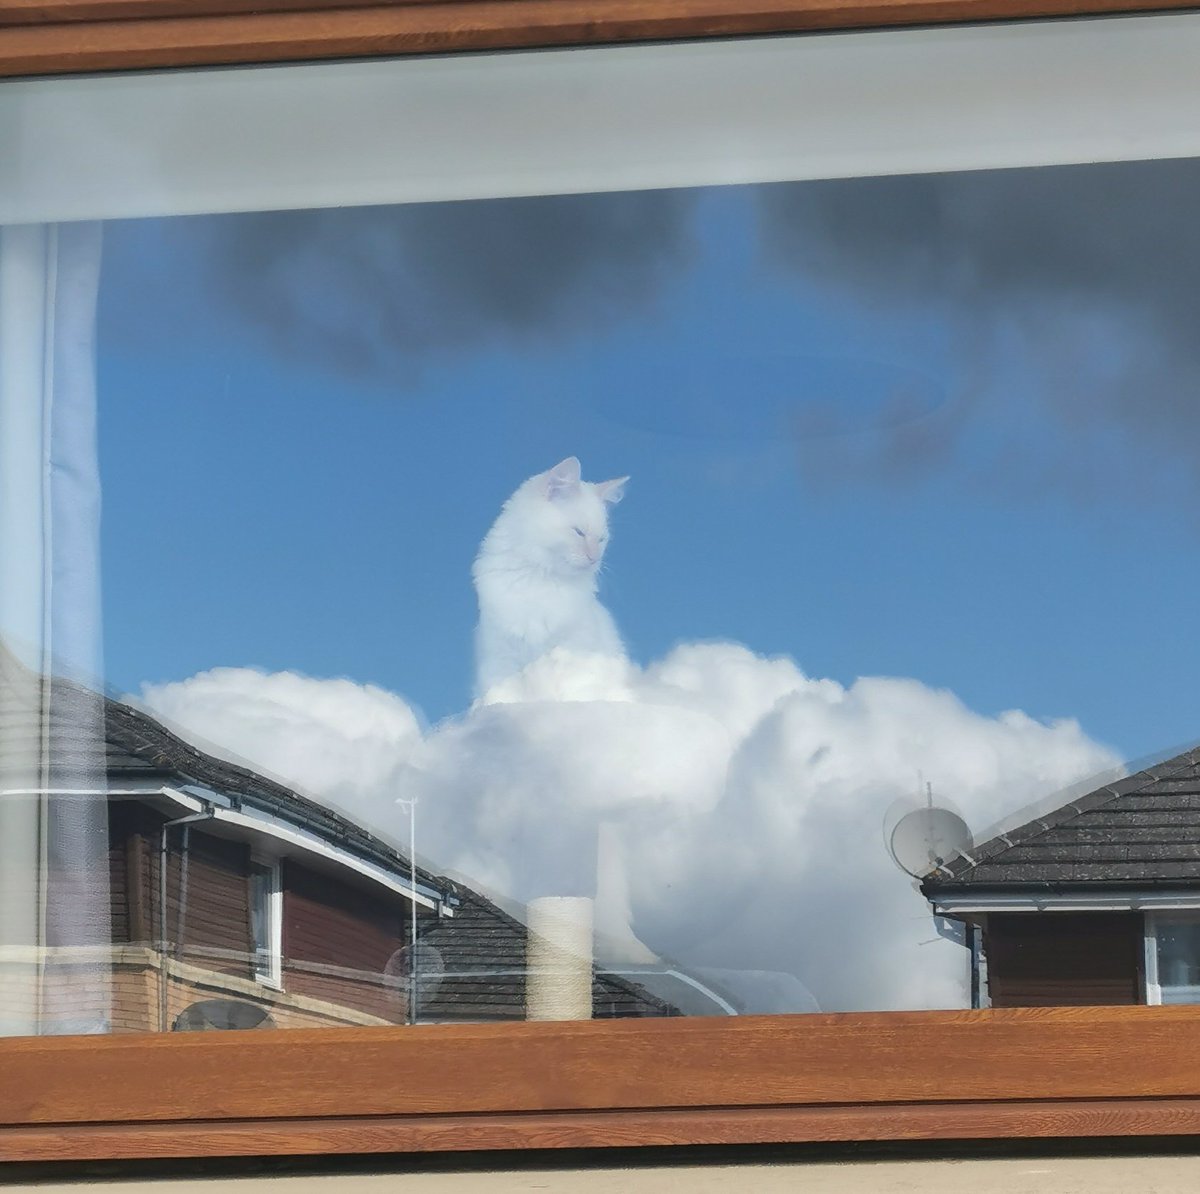 Took a pic of the cat lookin out the window and accidentally turned him into some sort of god.